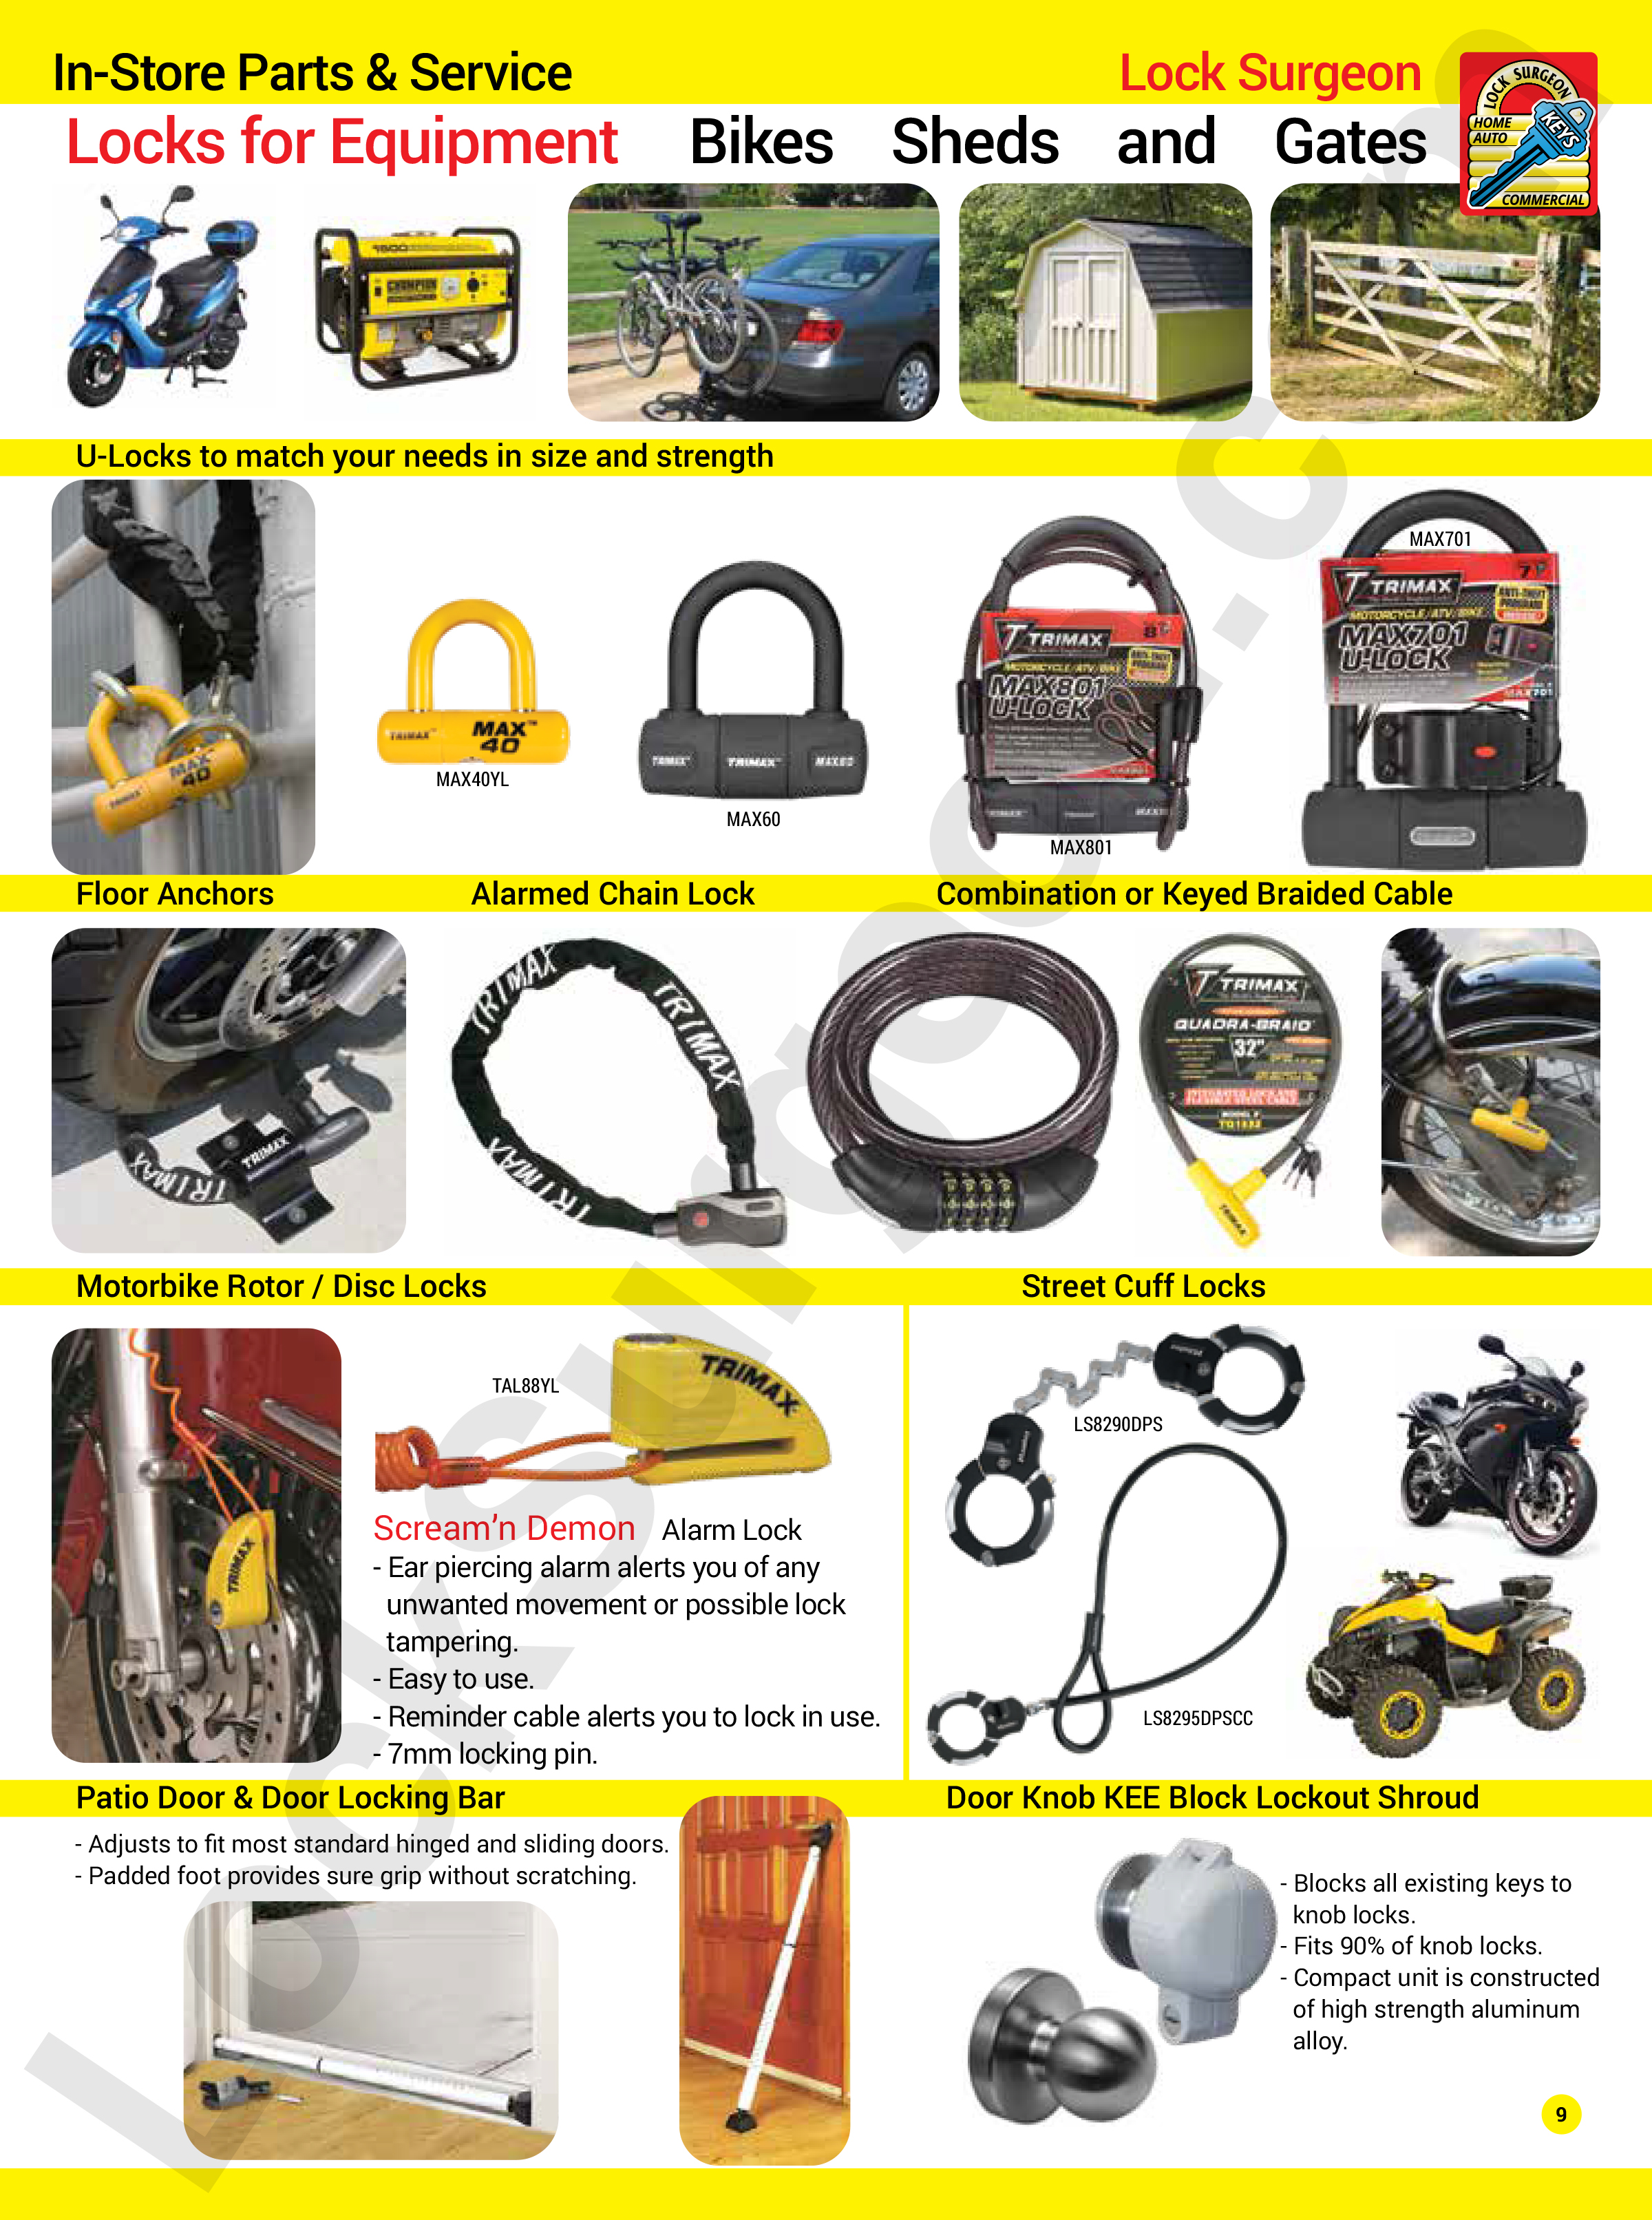 Superior locks for equipment bikes sheds & gates. Lock Surgeon Calgary in-store parts and service.